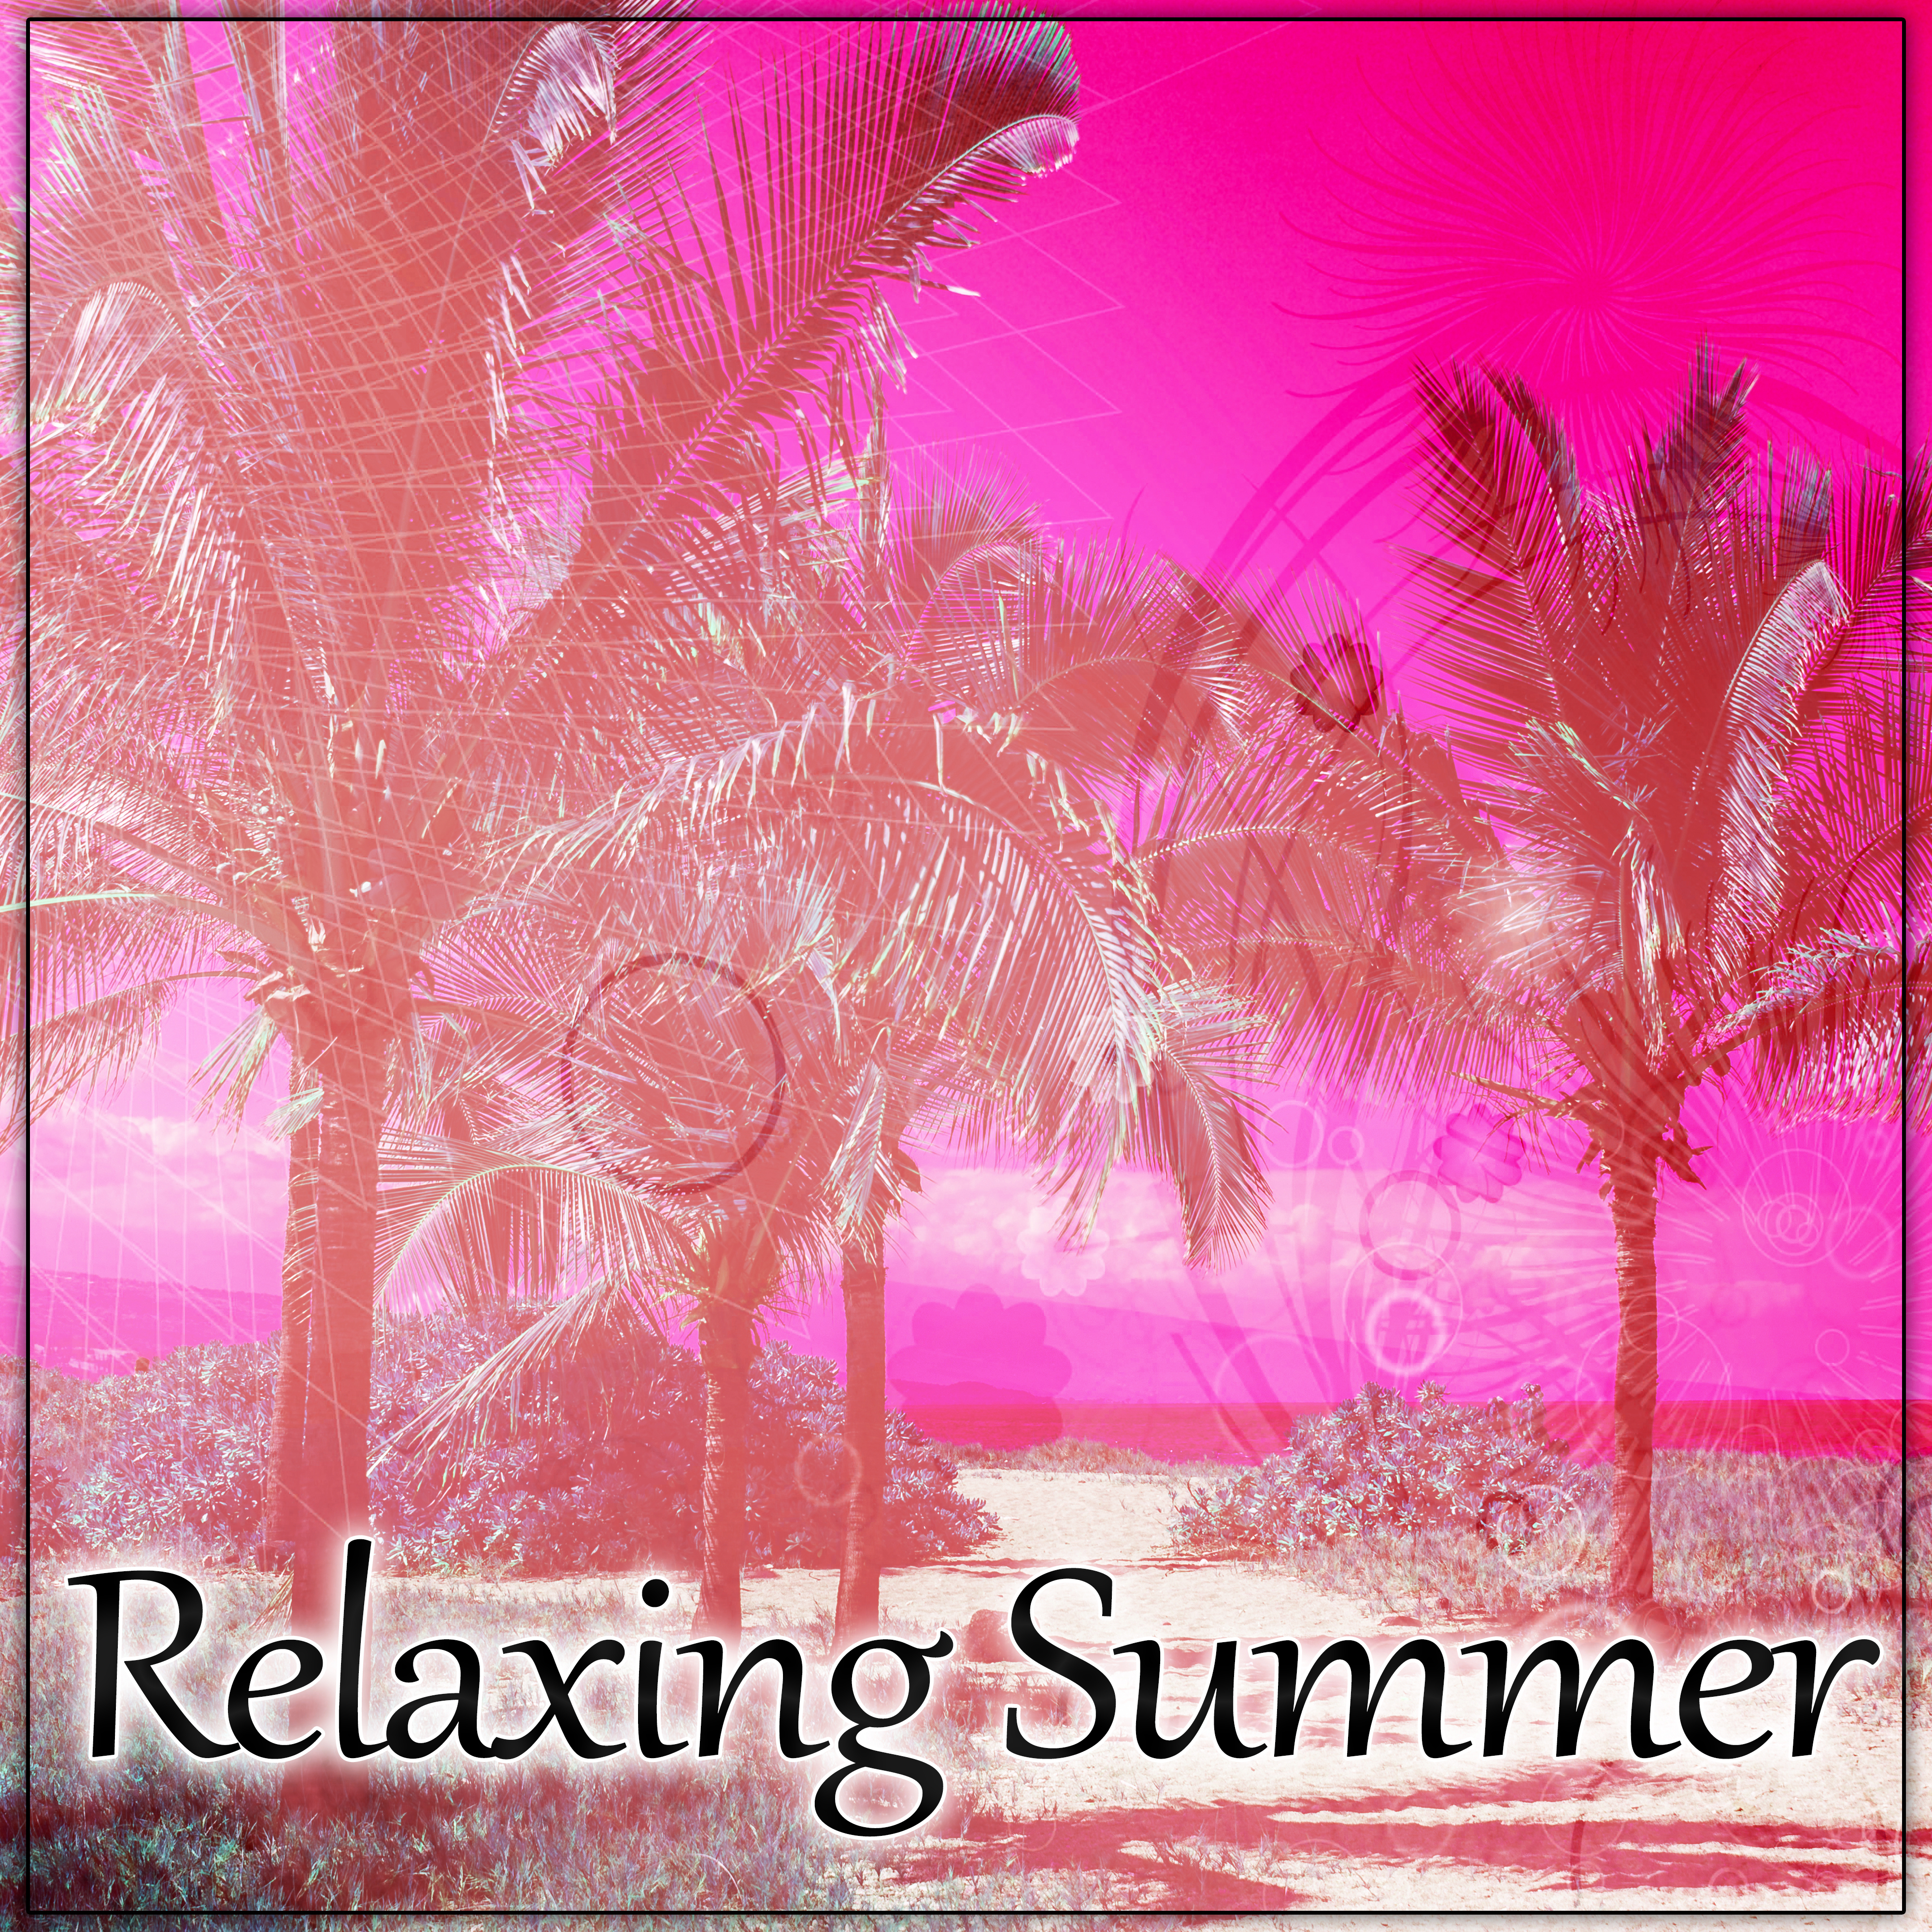 Relaxing Summer – Total Relax, Just Chill Out, Easy Listening